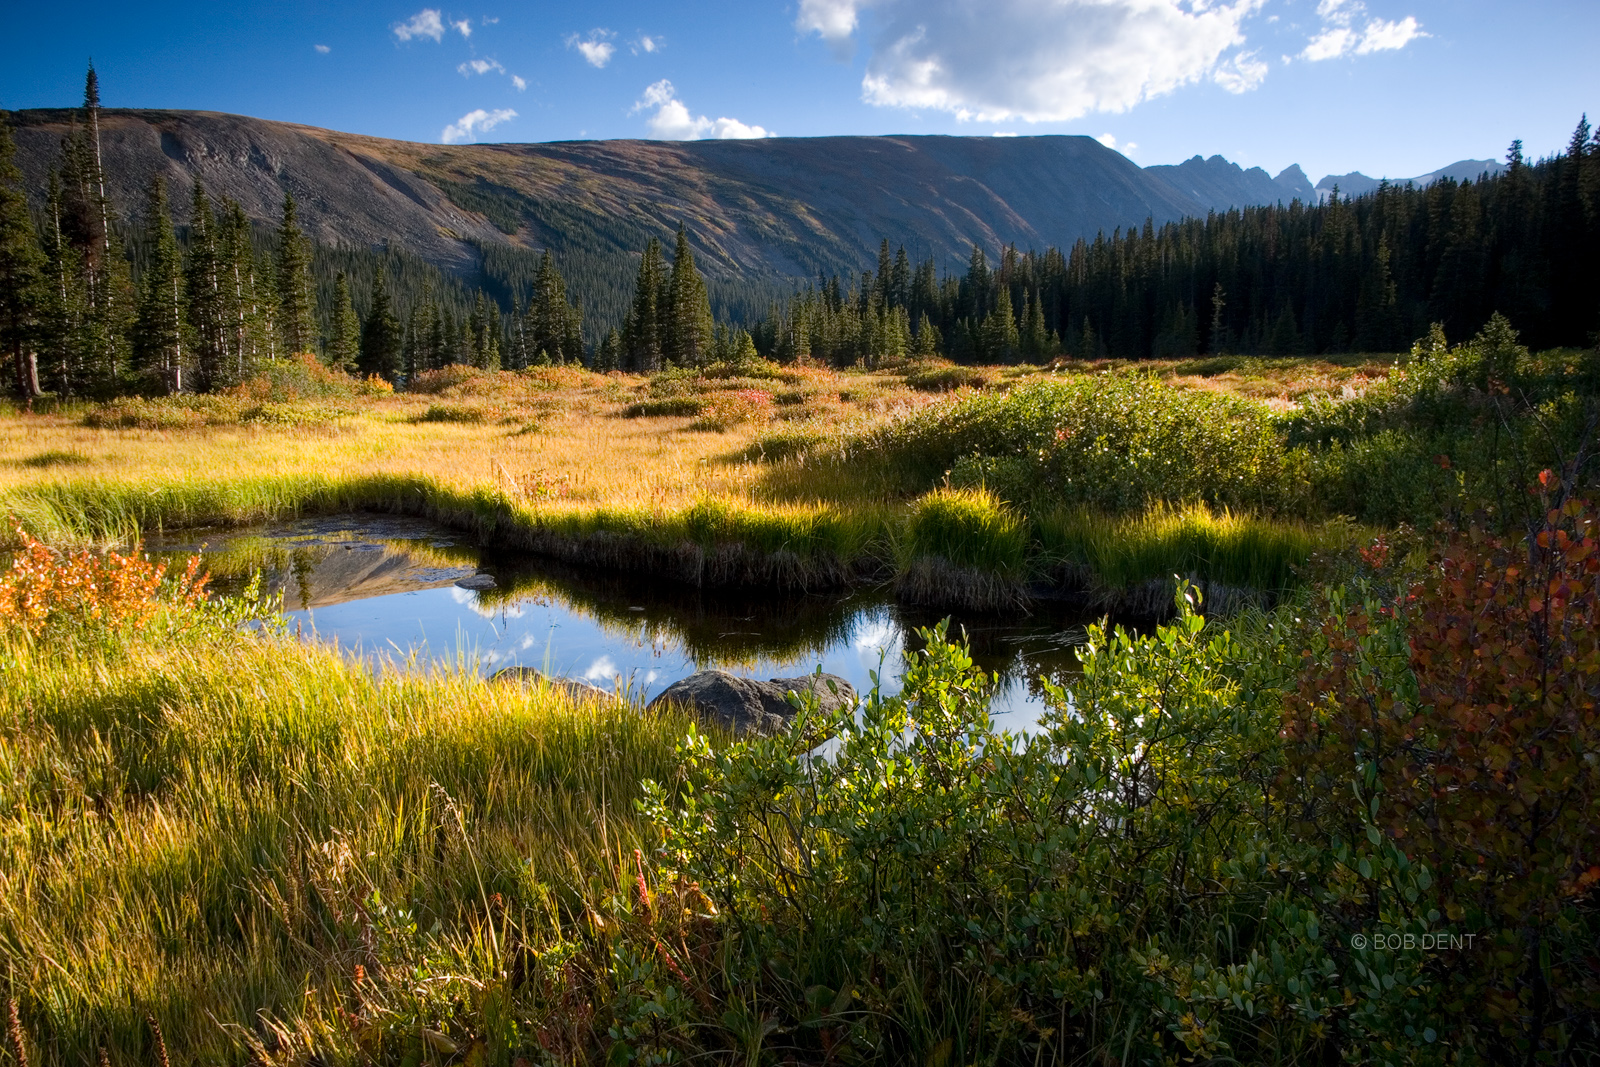 A small pond relection at sunset along the Pawnee Pass Trail, Indian Peaks Wilderness, Colorado.